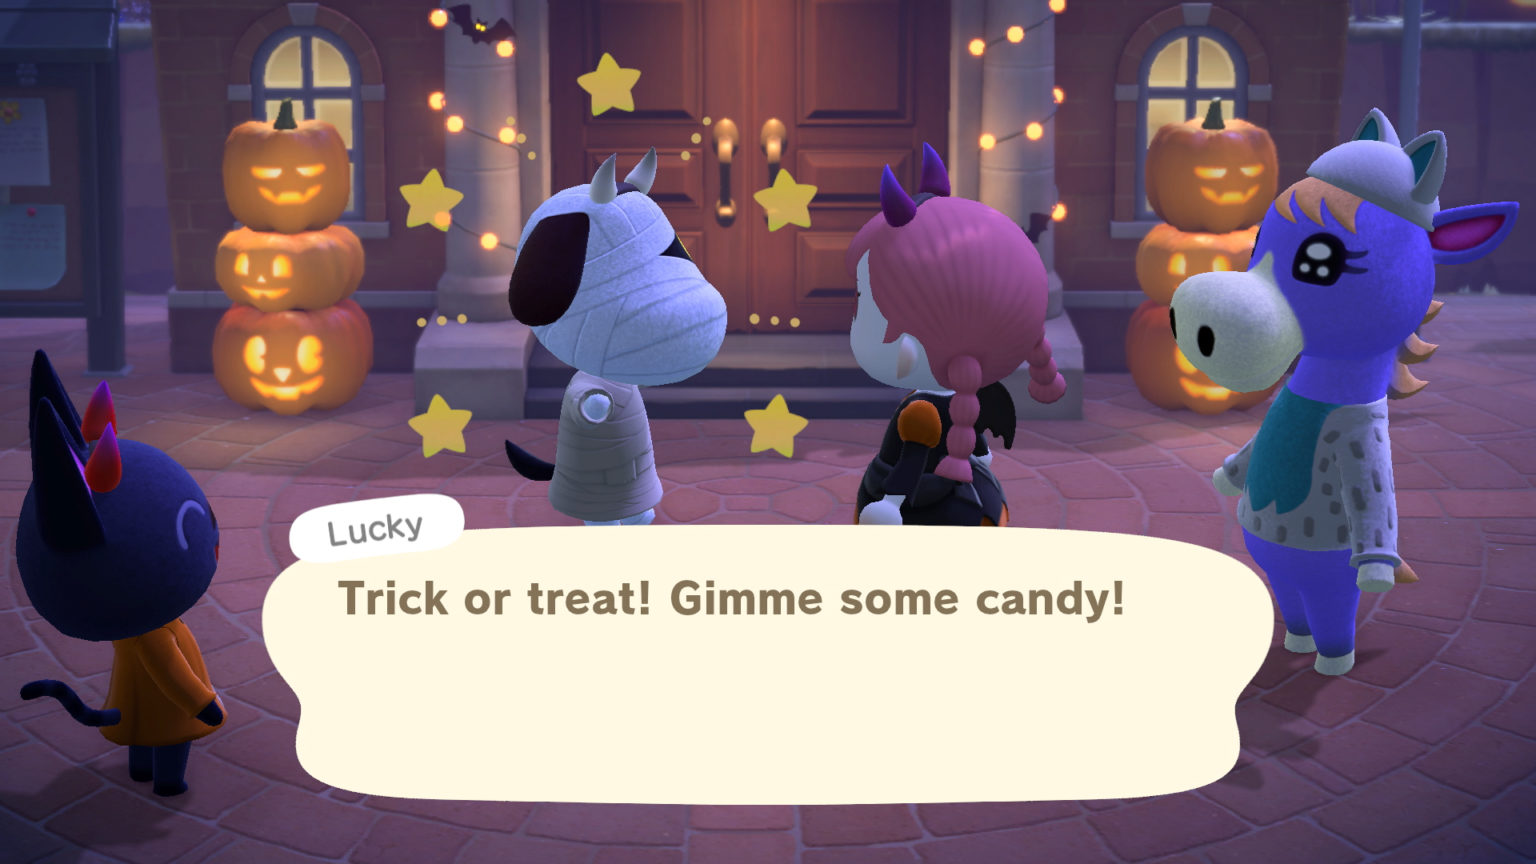 Halloween is coming to Animal Crossing New Horizons